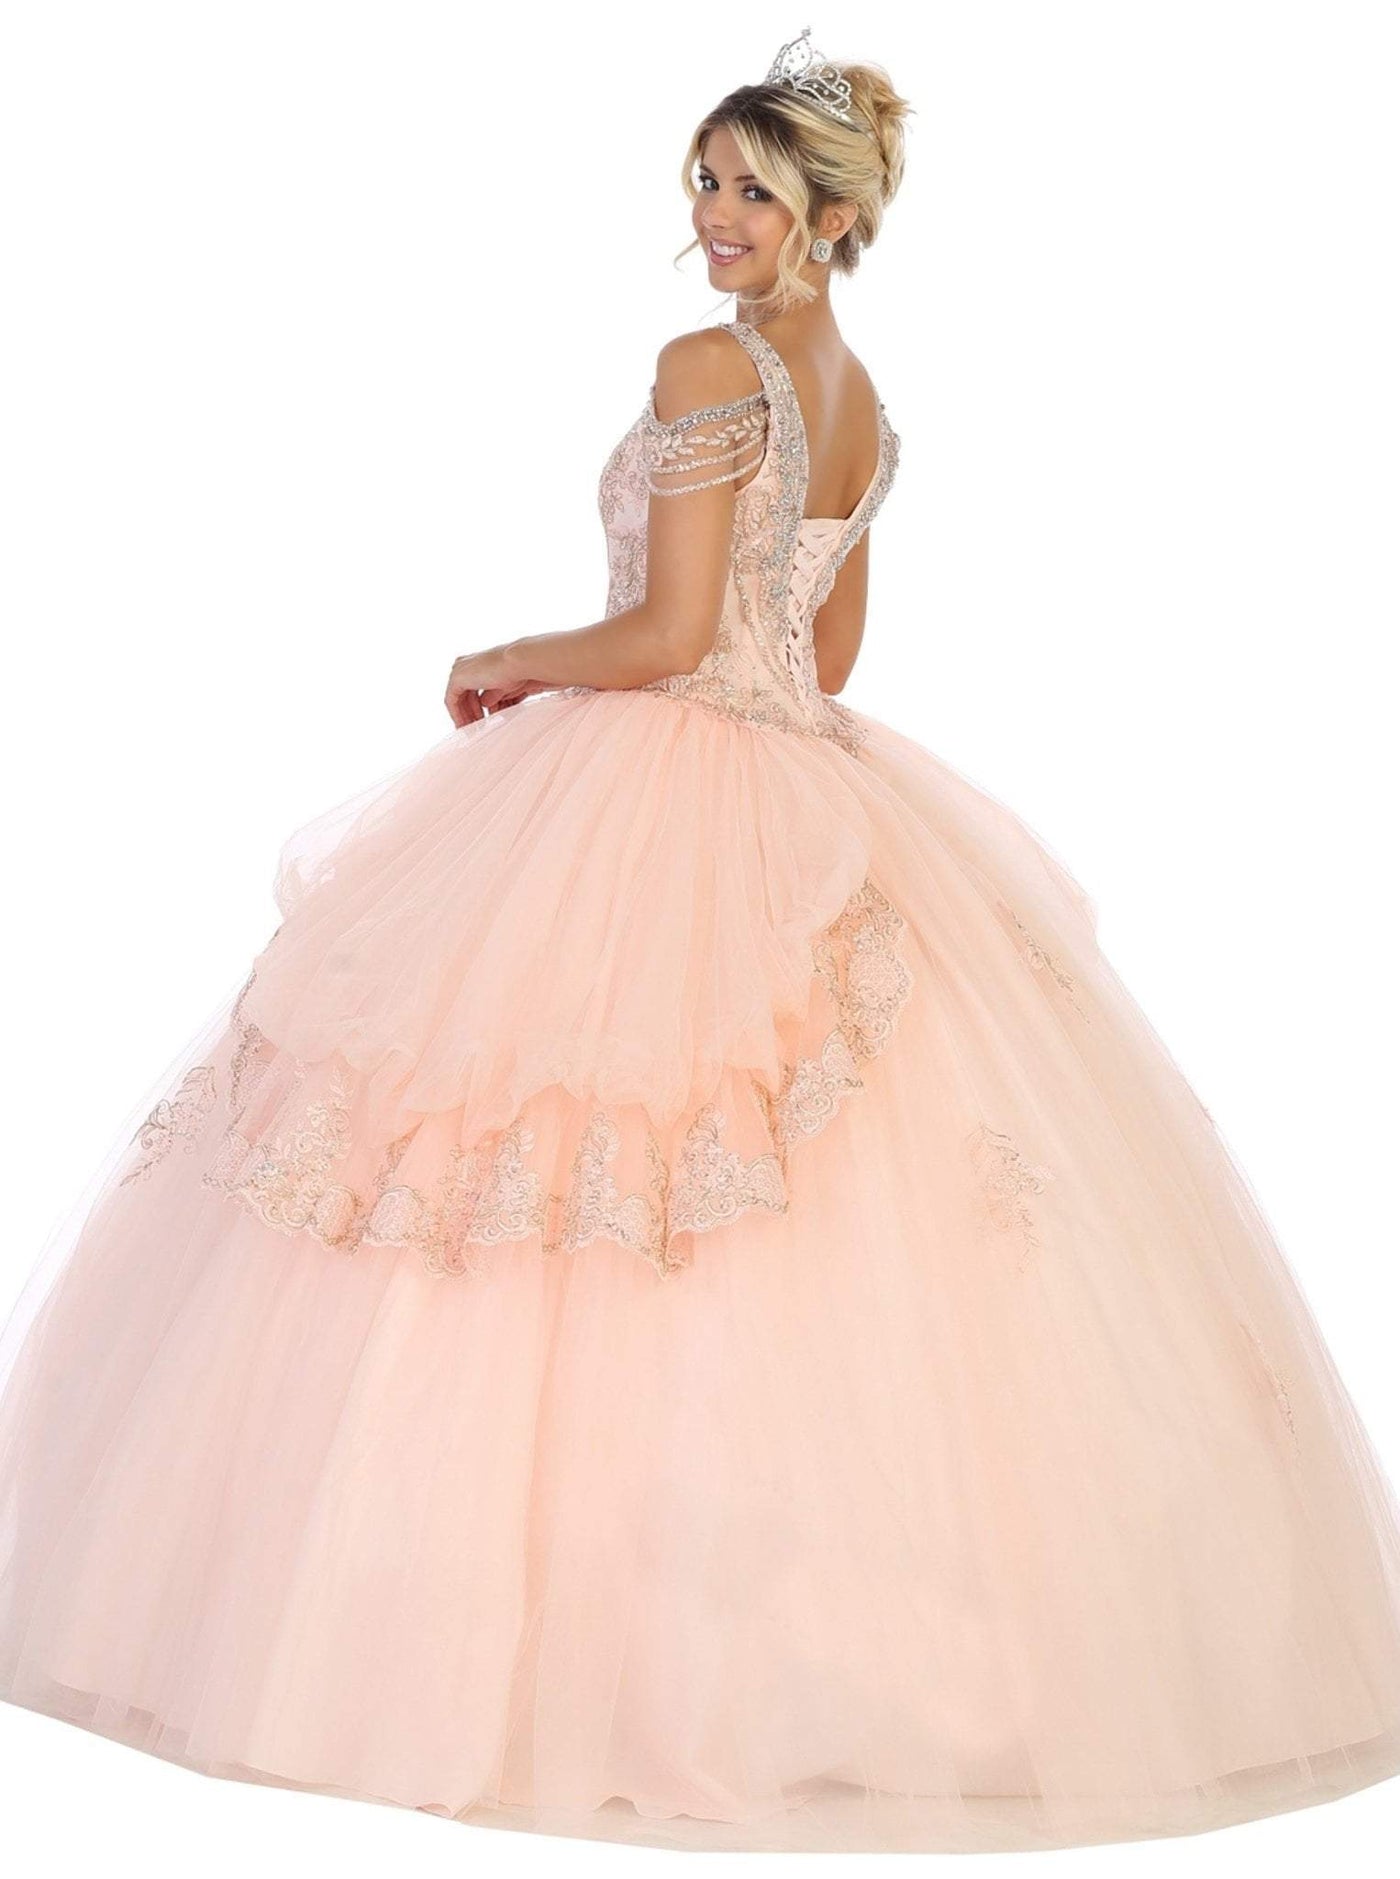 May Queen - LK116 Jeweled Lace Bodice Ruffled Ballgown In Pink